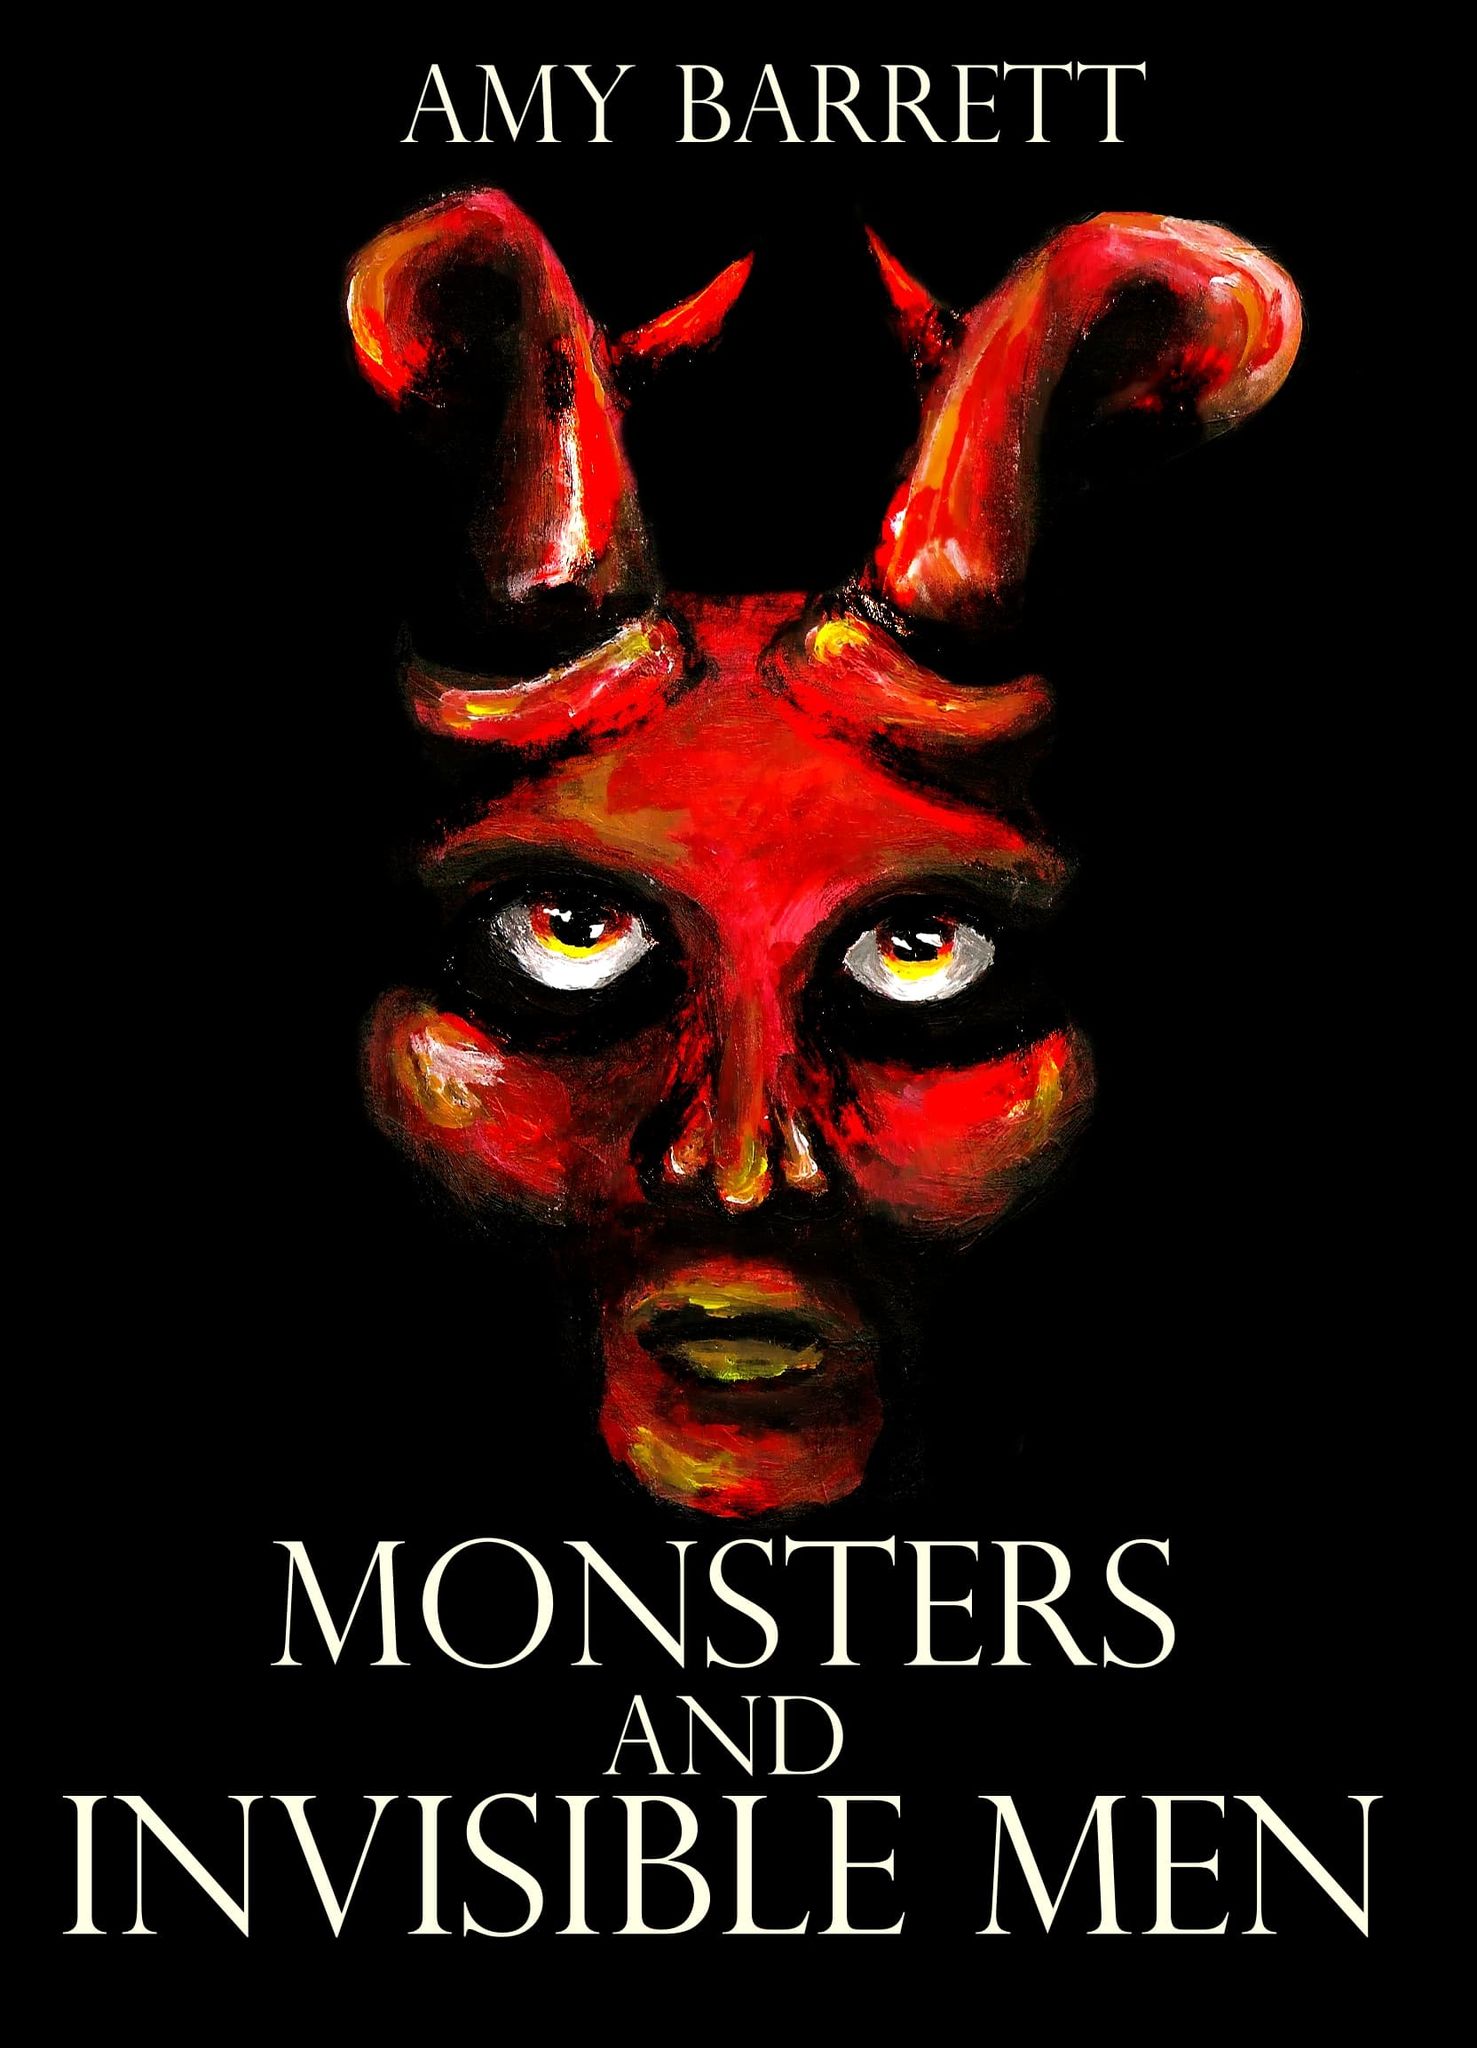 FREE: Monsters and Invisible Men by Amy Barrett